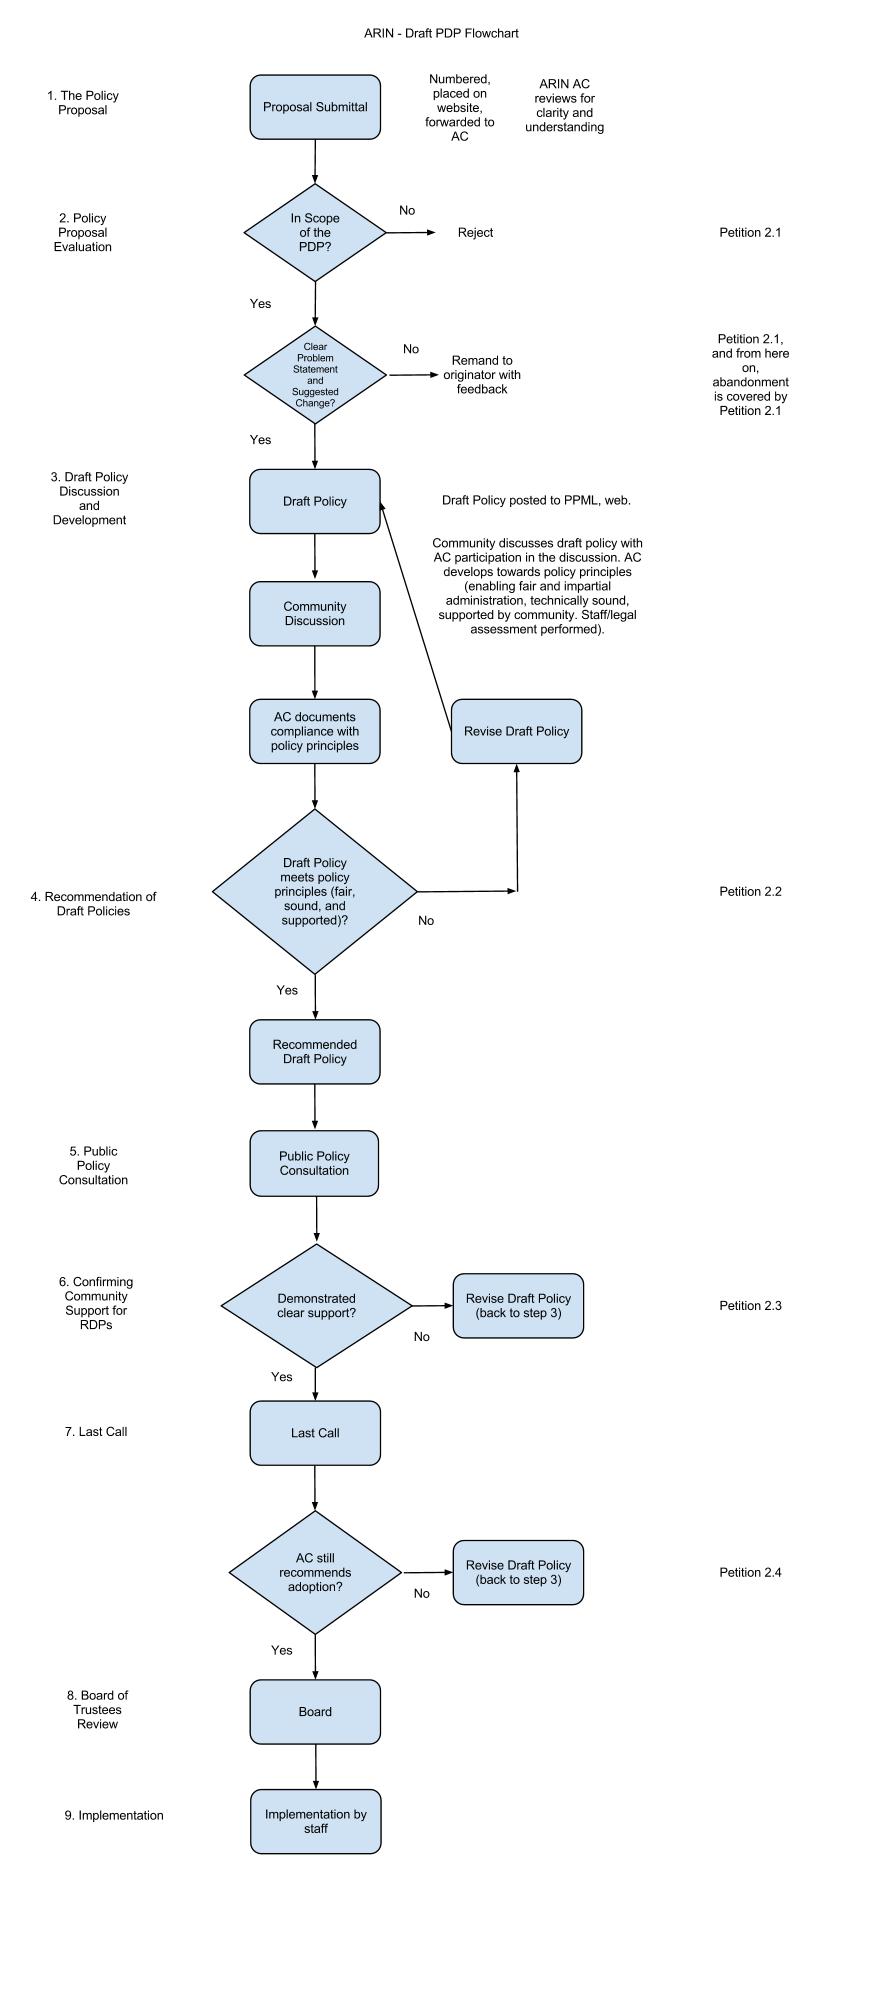 Flowchart of the proposed revision of the Policy Development Process